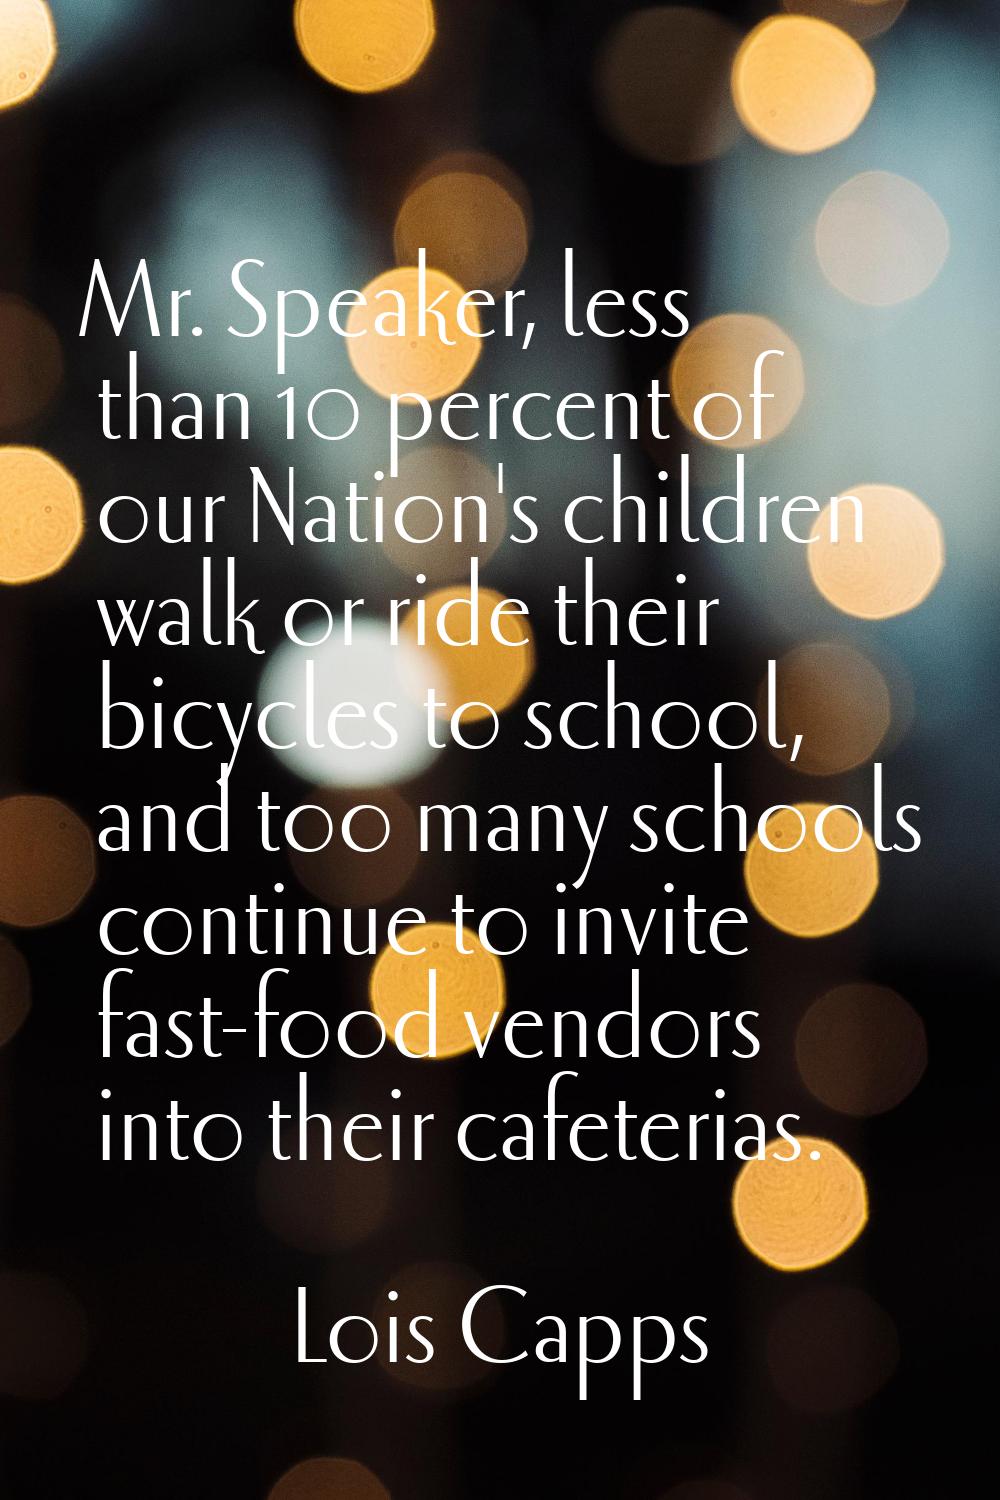 Mr. Speaker, less than 10 percent of our Nation's children walk or ride their bicycles to school, a